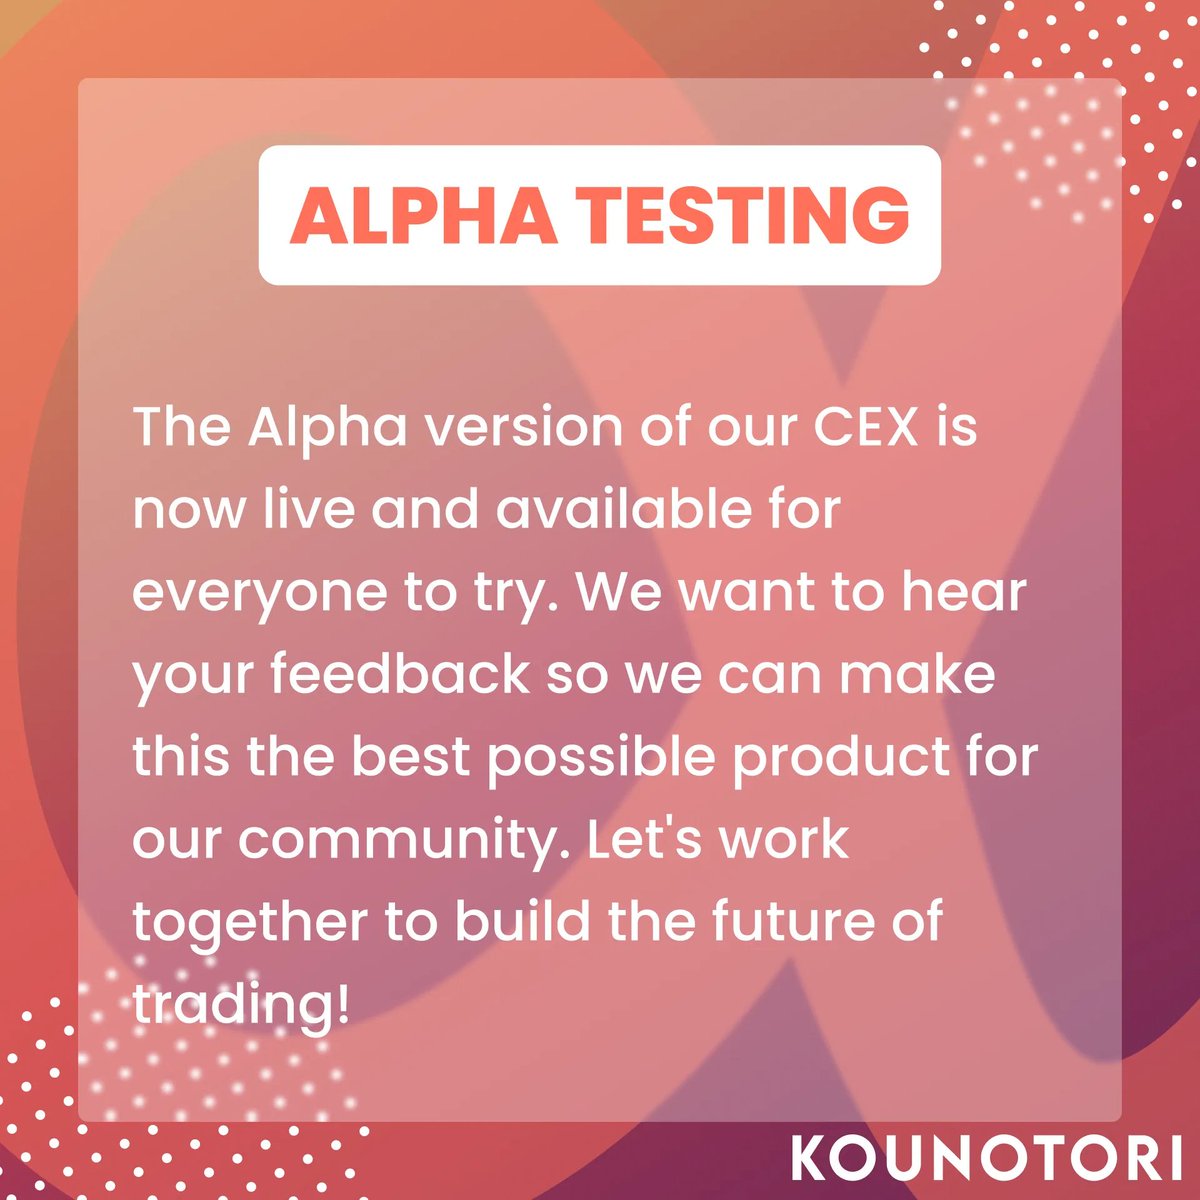 KTO Exchange #Alpha is still live and accepting users!

Signup now!
👇
dev.ktoexchange.com

For more information join our discord:
👇
discord.gg/kounotoritoken

#KTO #CRYPTO #AlphaTesting